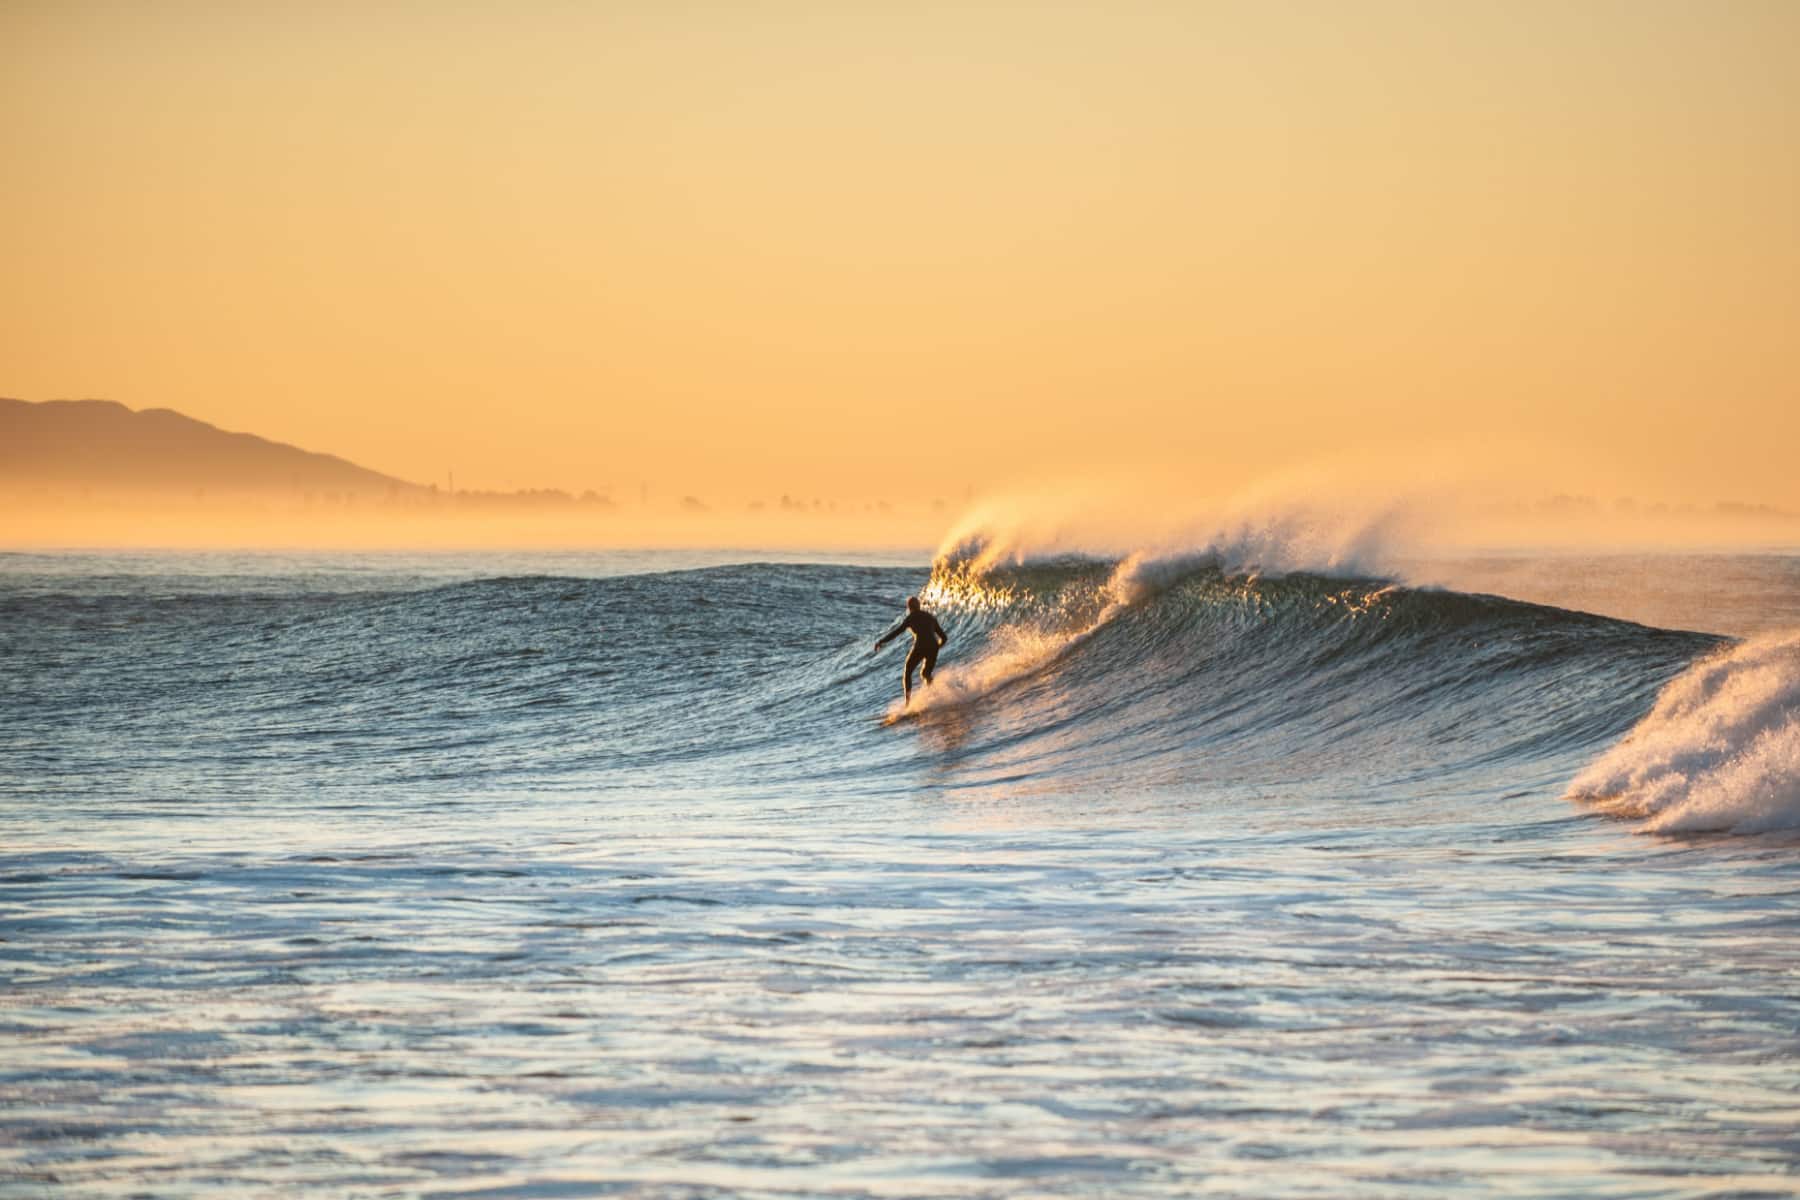 A surfer riding a small wave at Ventura Beach in the early morning glow.